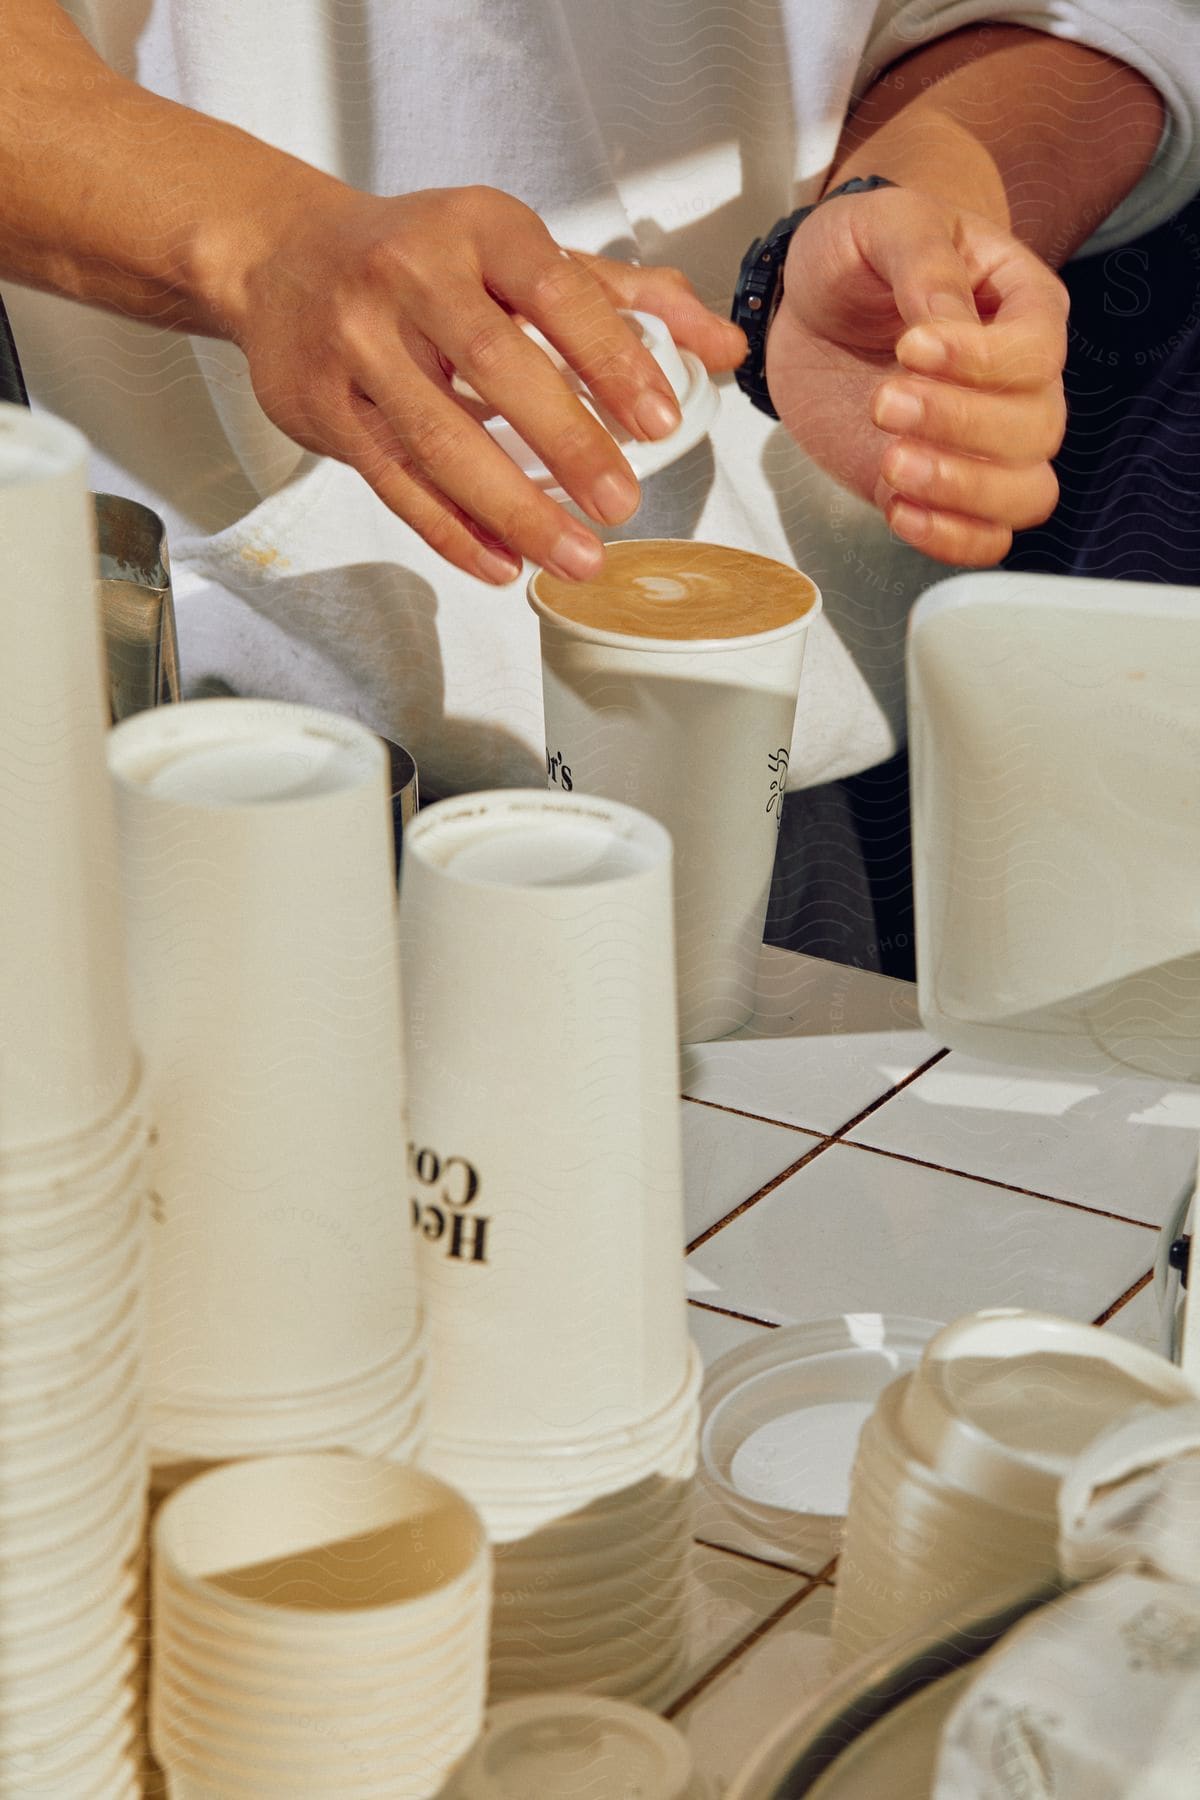 Persons hands holding a large cup of coffee latte